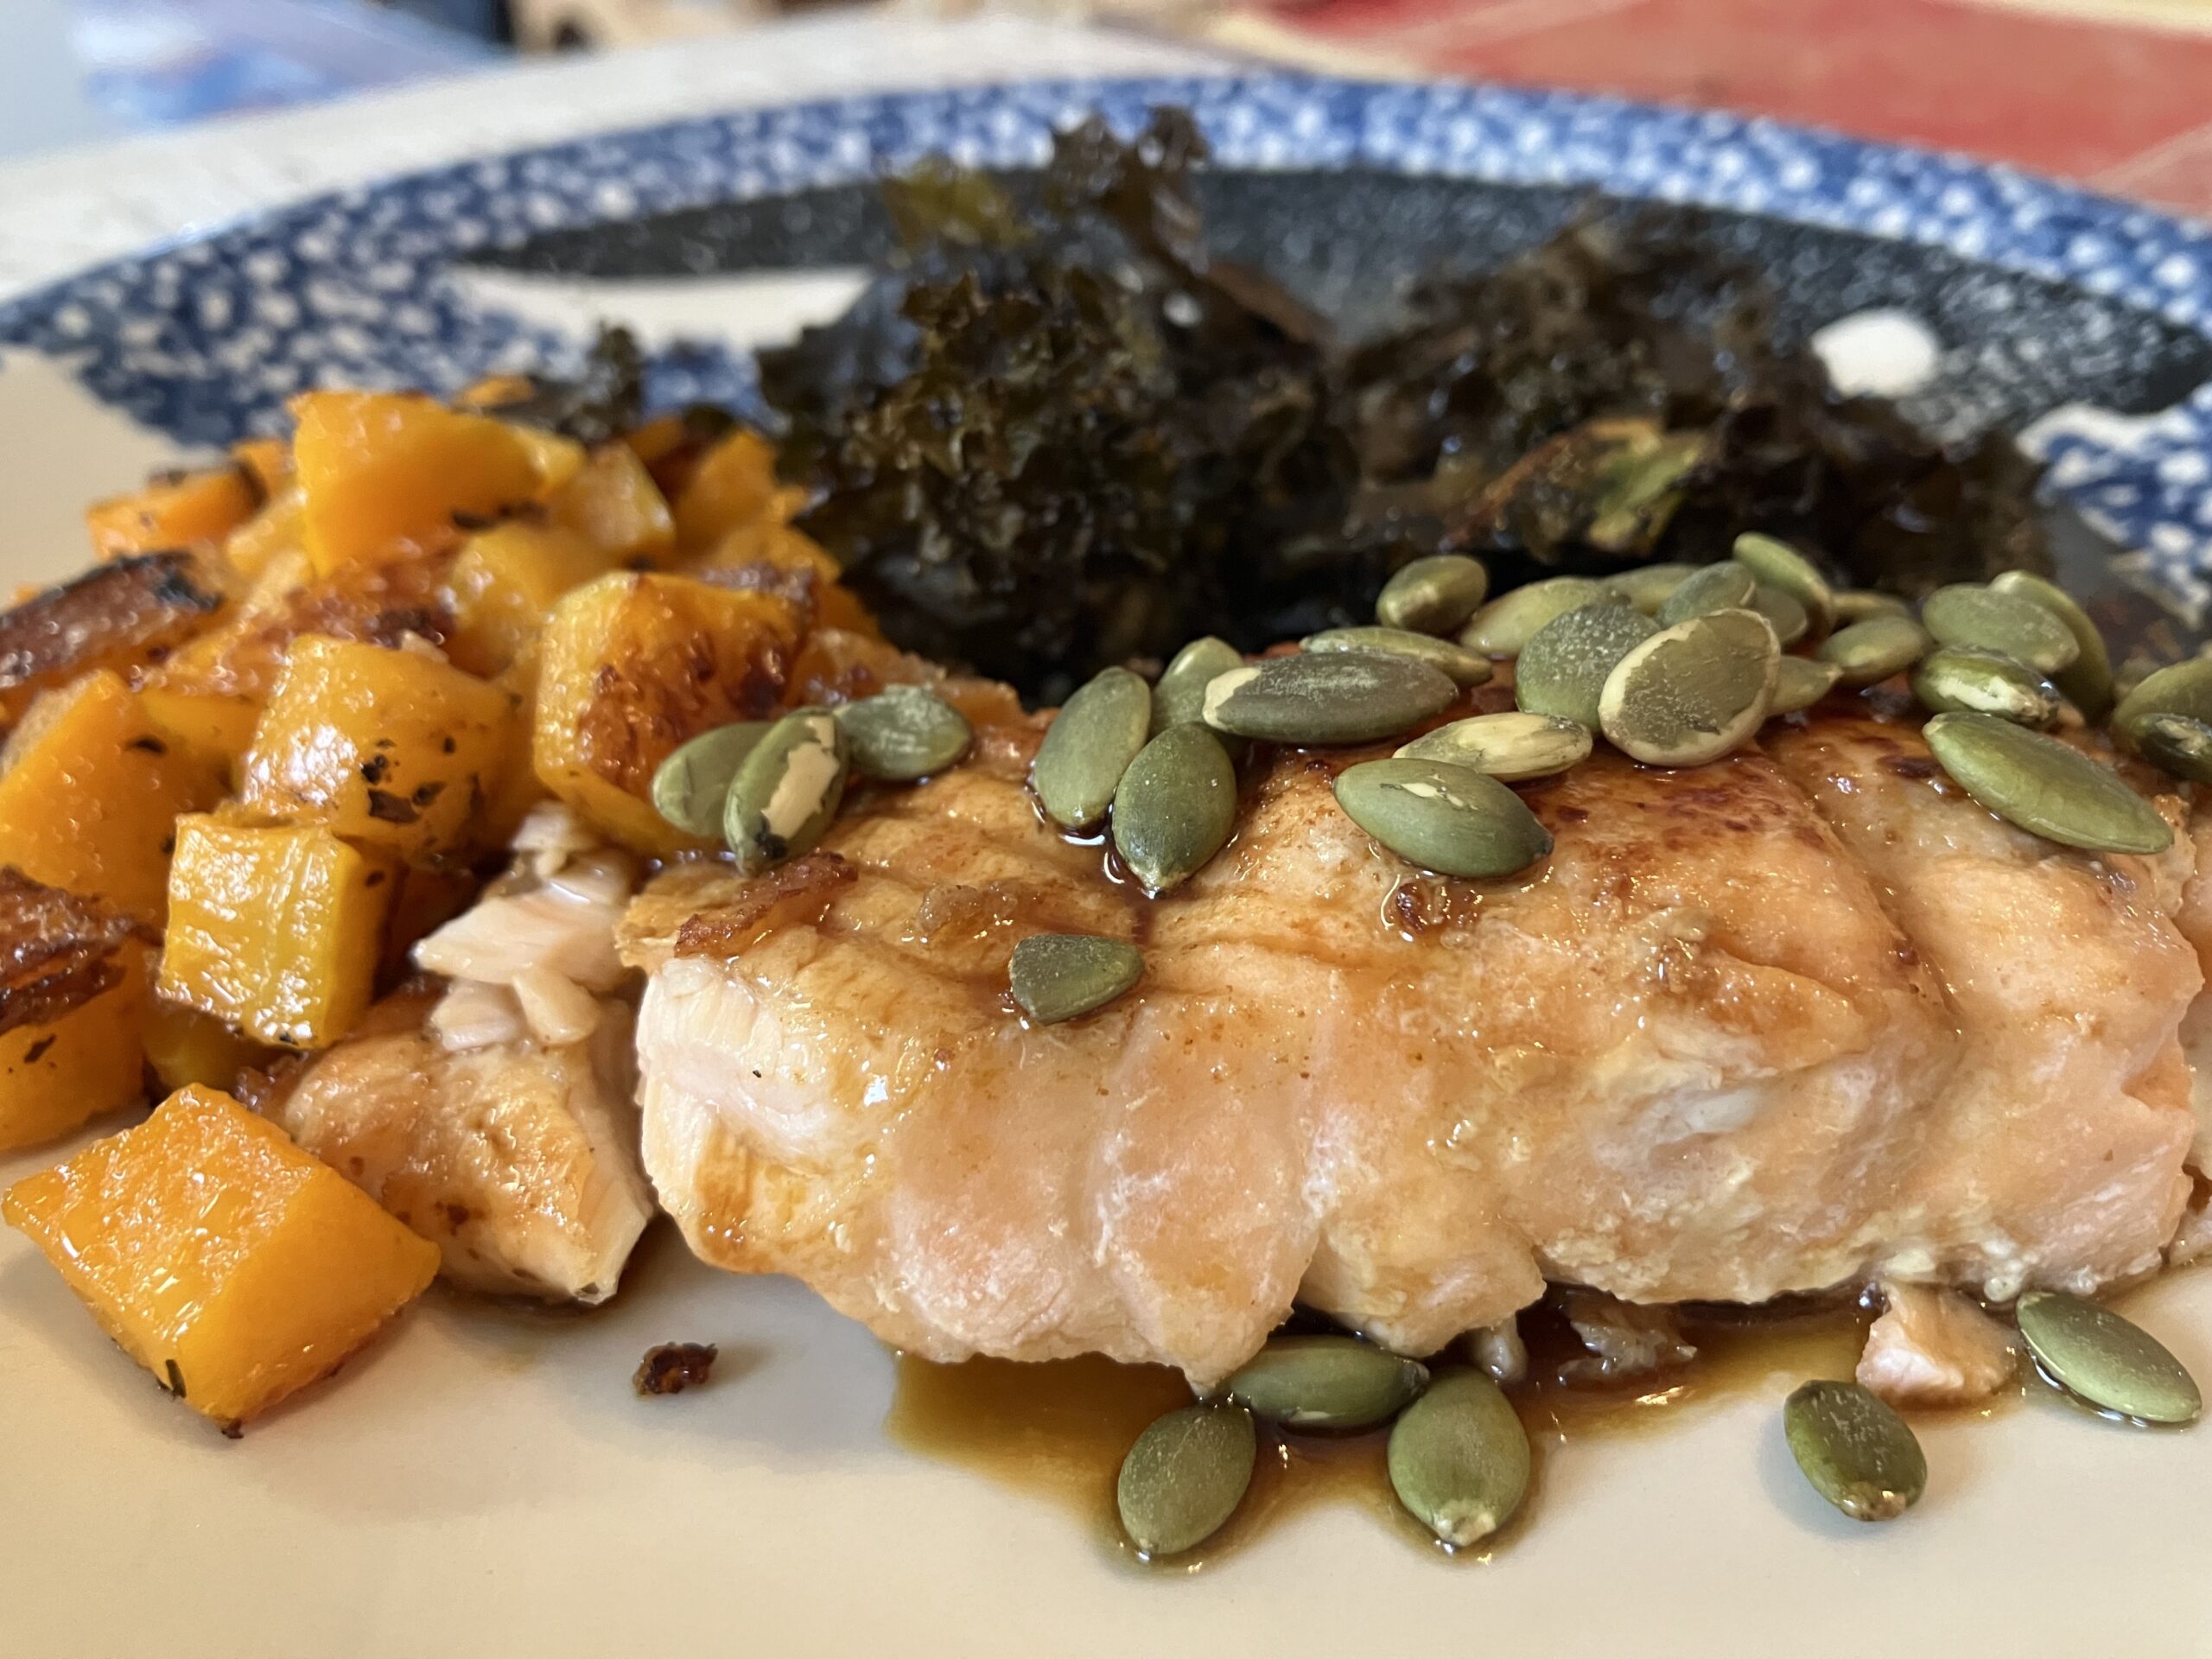 Cooked fish sprinkled with pumpkin seeds in front of squash and kale.